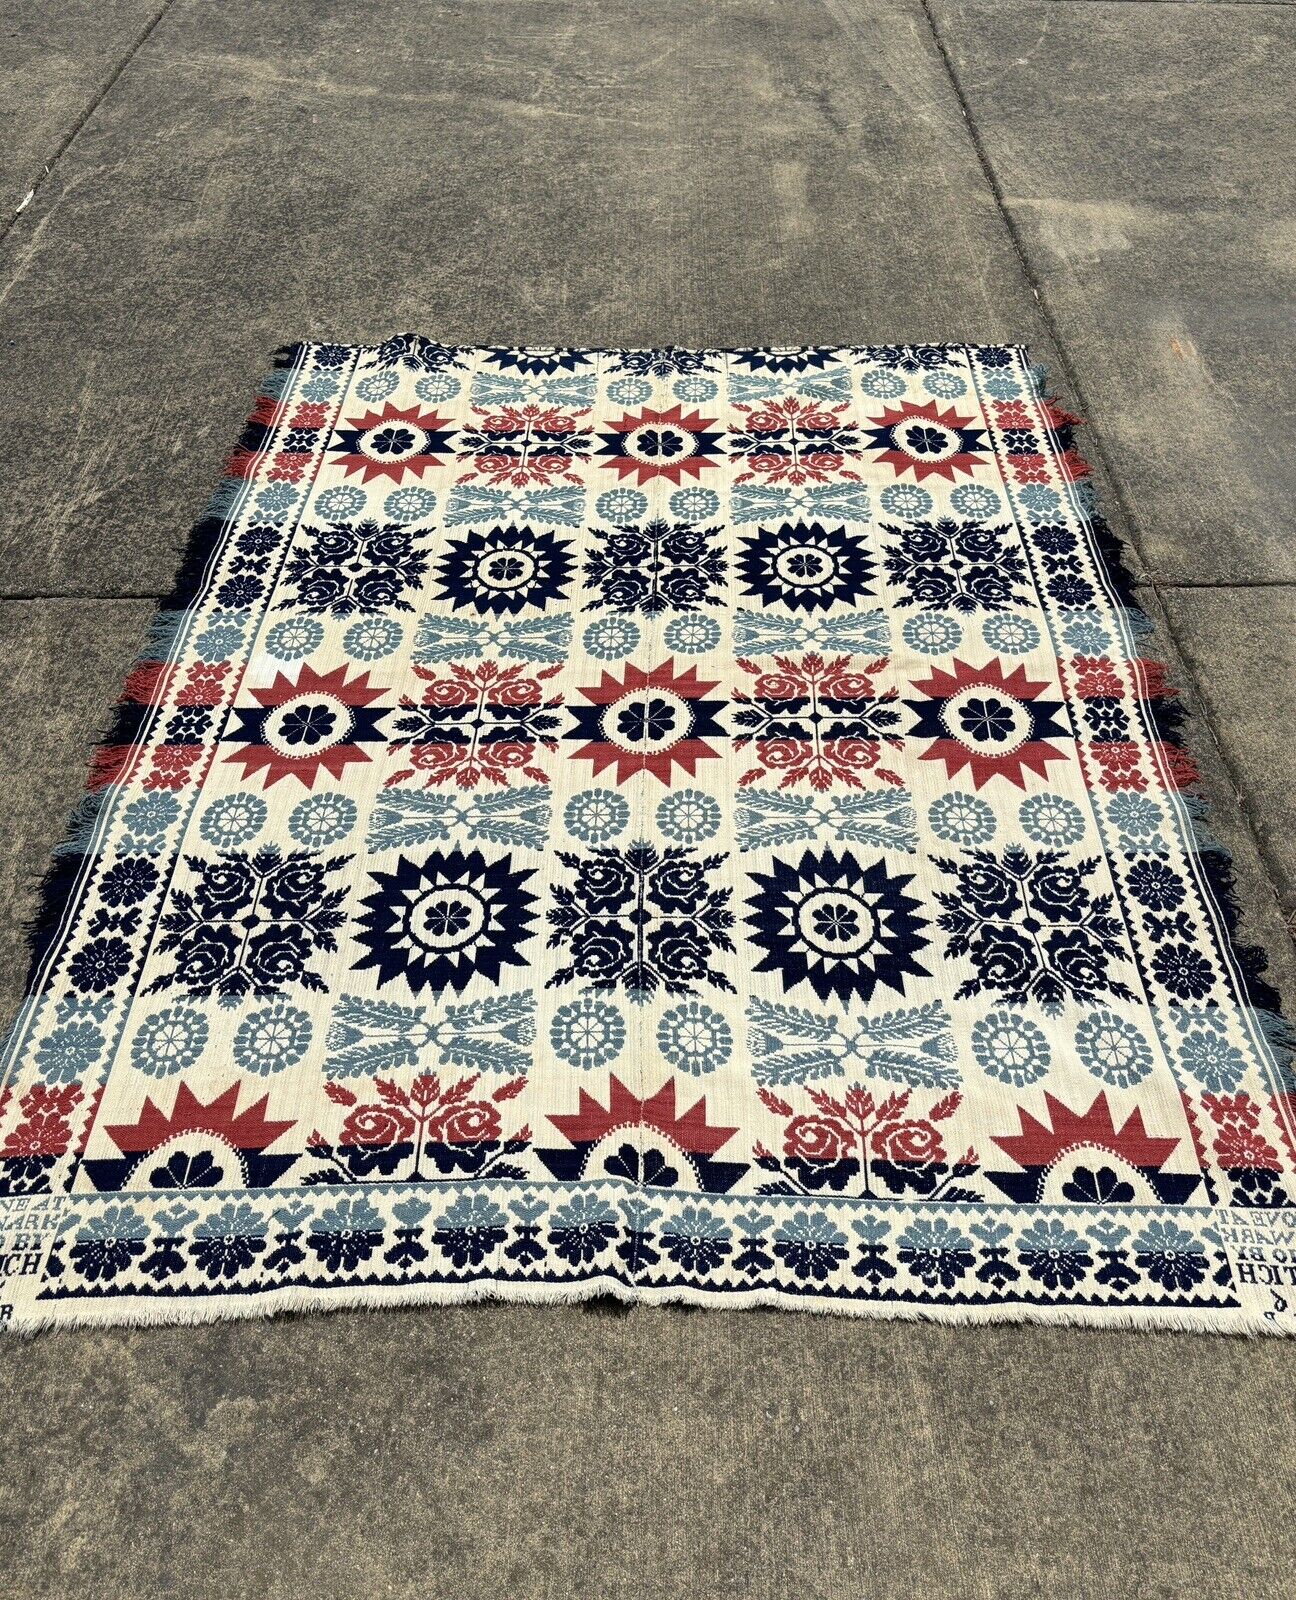 antique 1800s coverlet | Blue And Red | Floral | Made In Ohio 1846 Textile